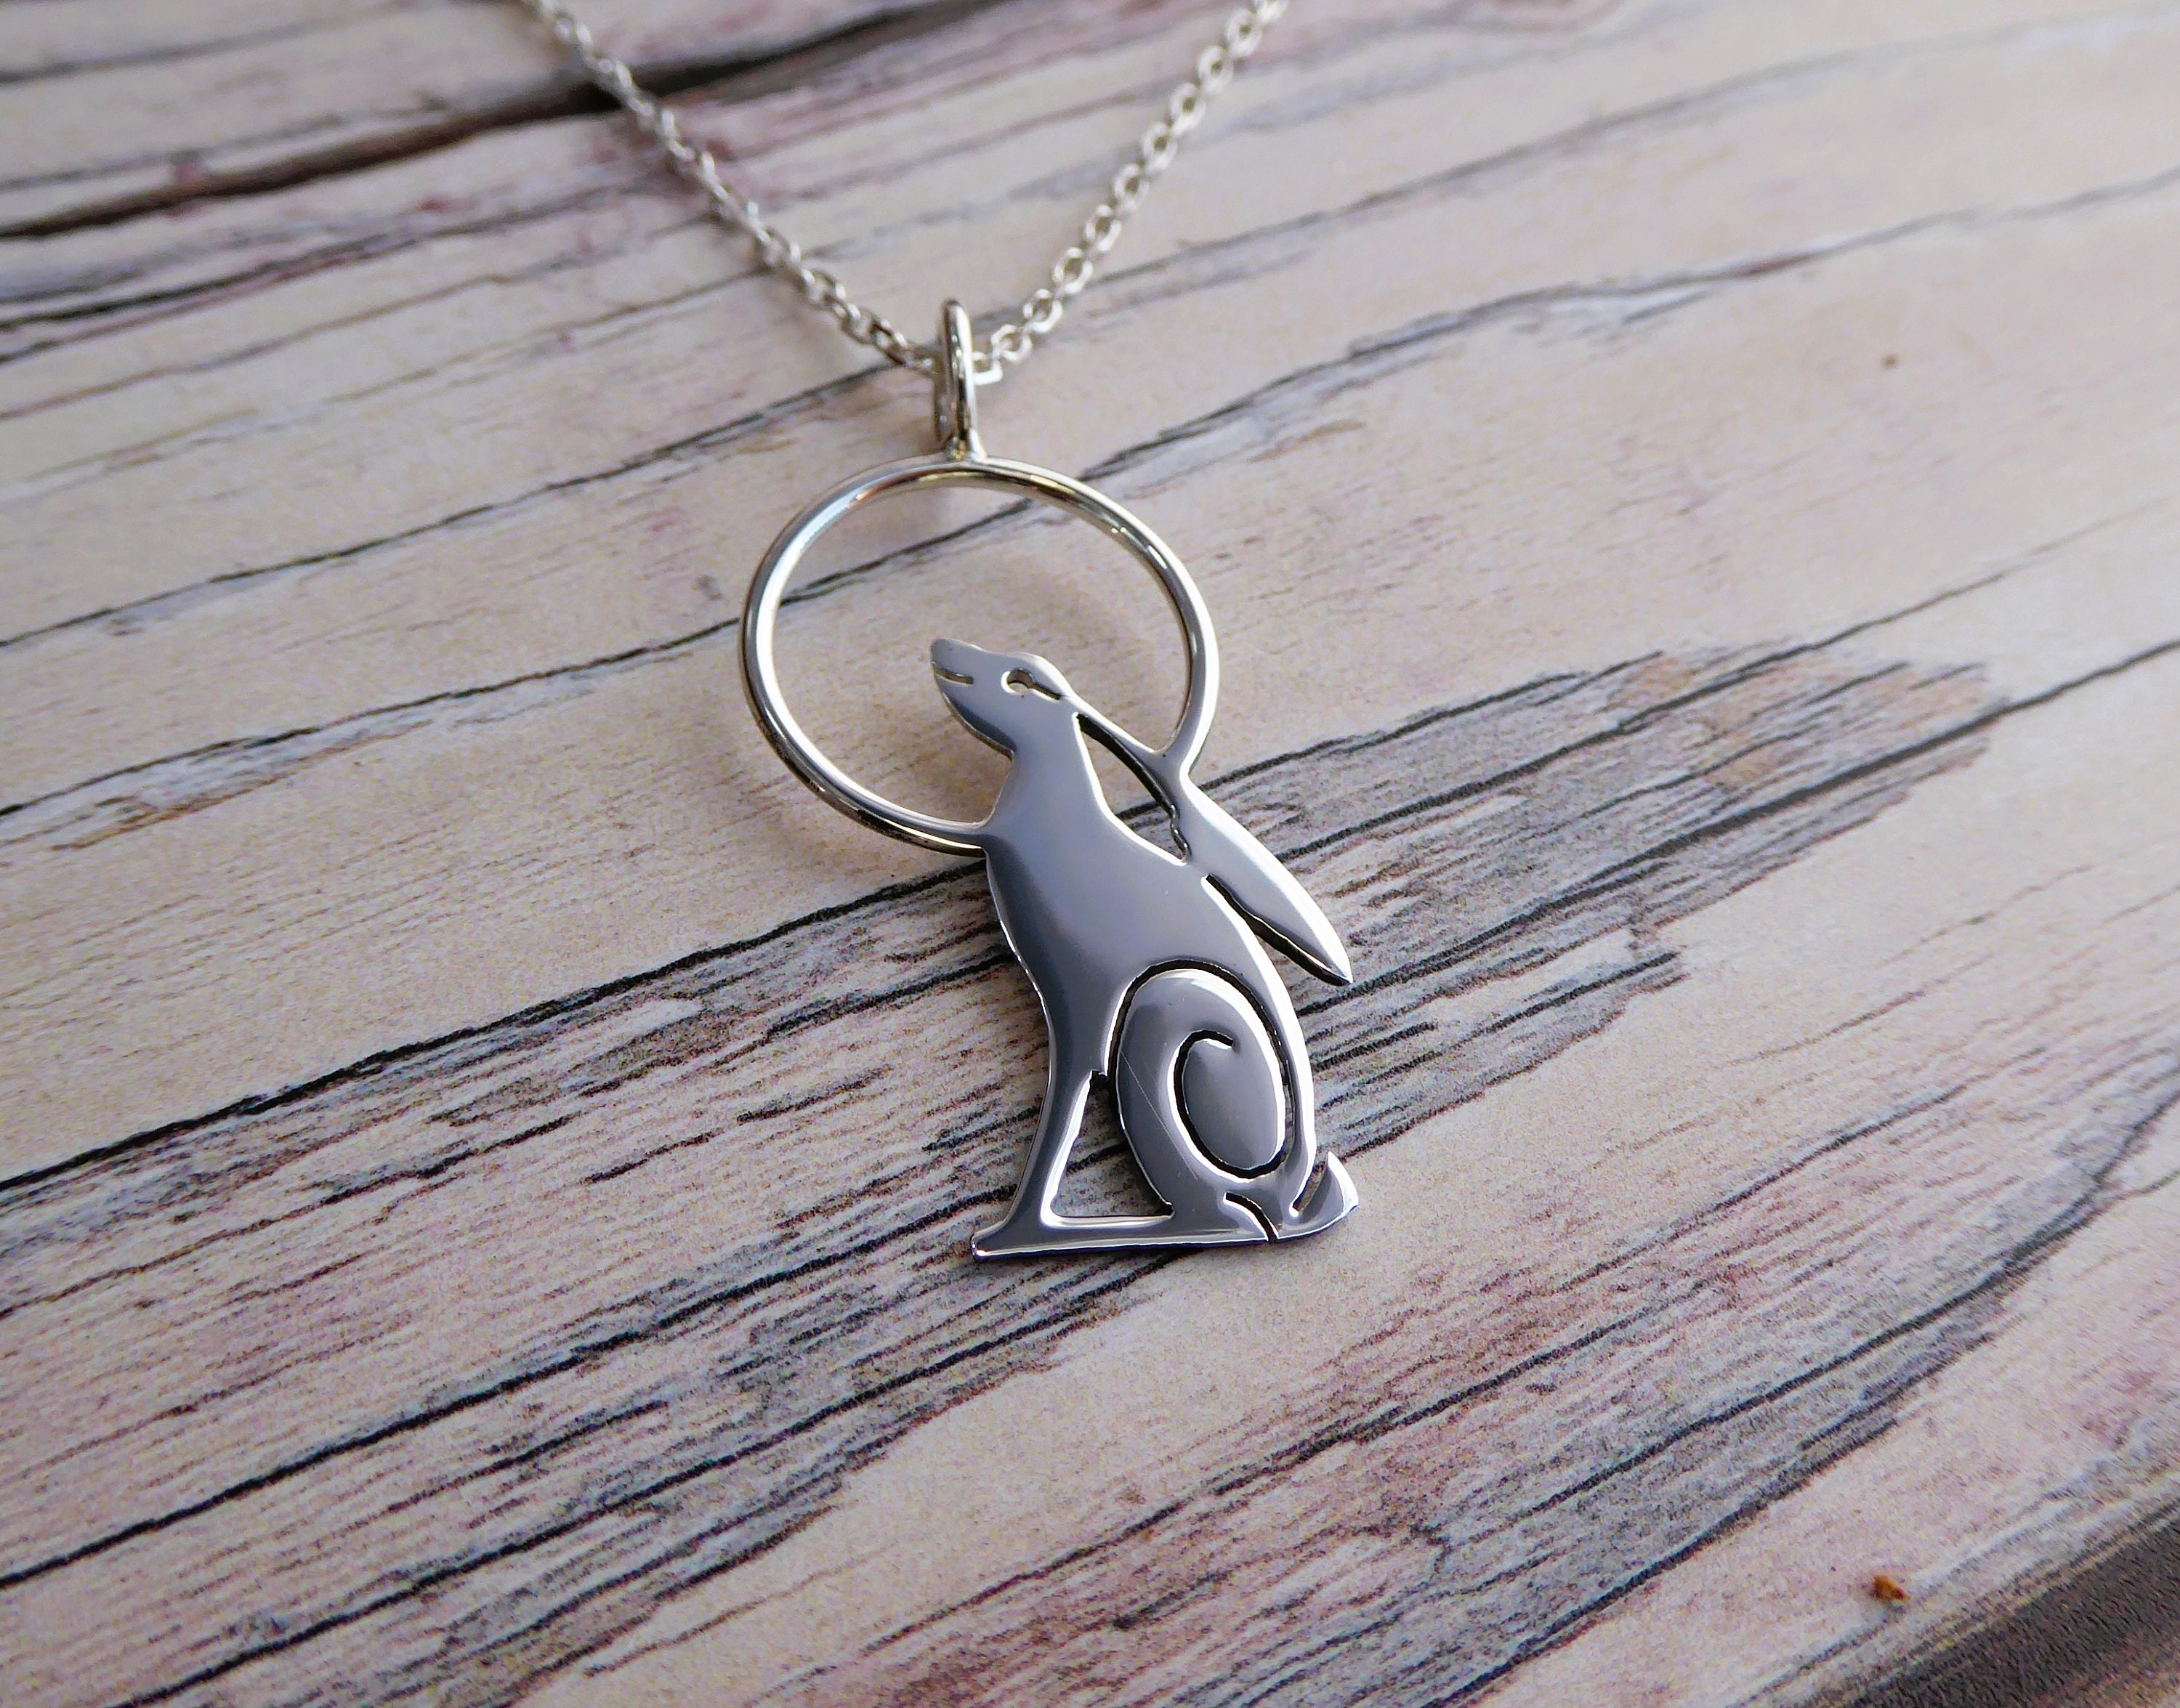 Moon Gazing hare jewellery in bronze Hare in the Moon pendant handmade from coins Campsodella Hare necklace made from recycled coins Sieraden Kettingen Hangers 